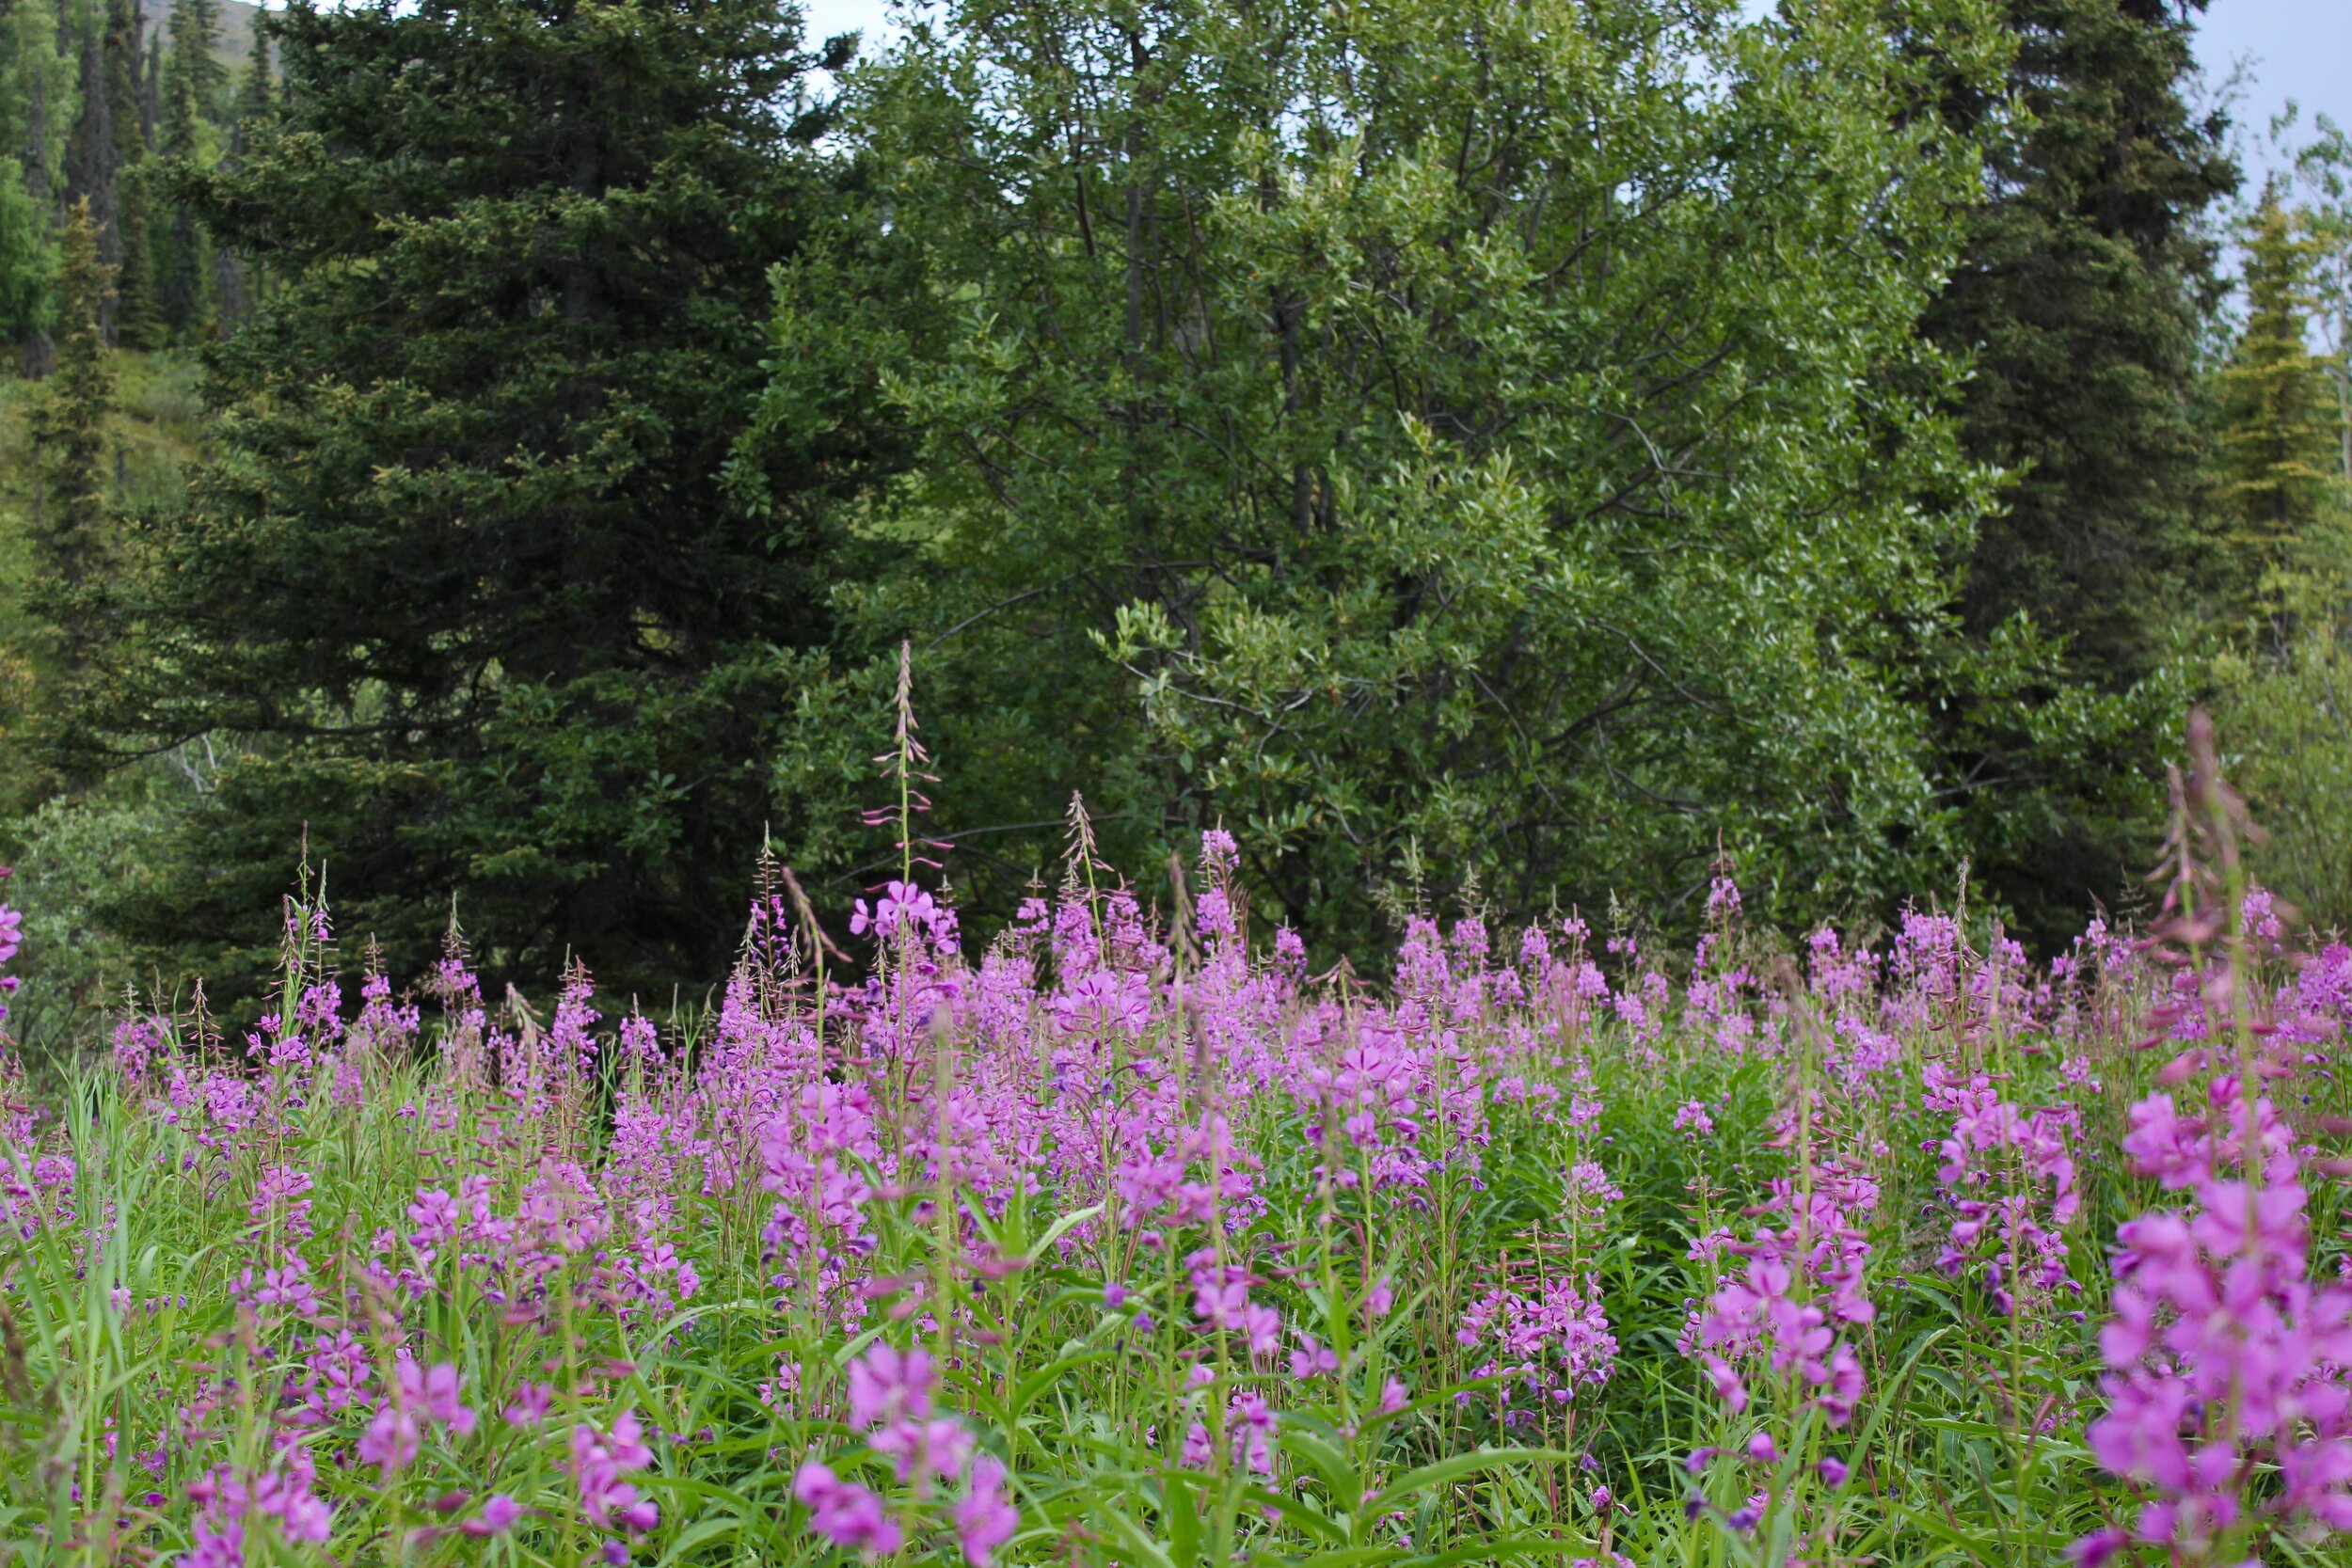  Fireweed—one of my favorite parts of Alaska summers 